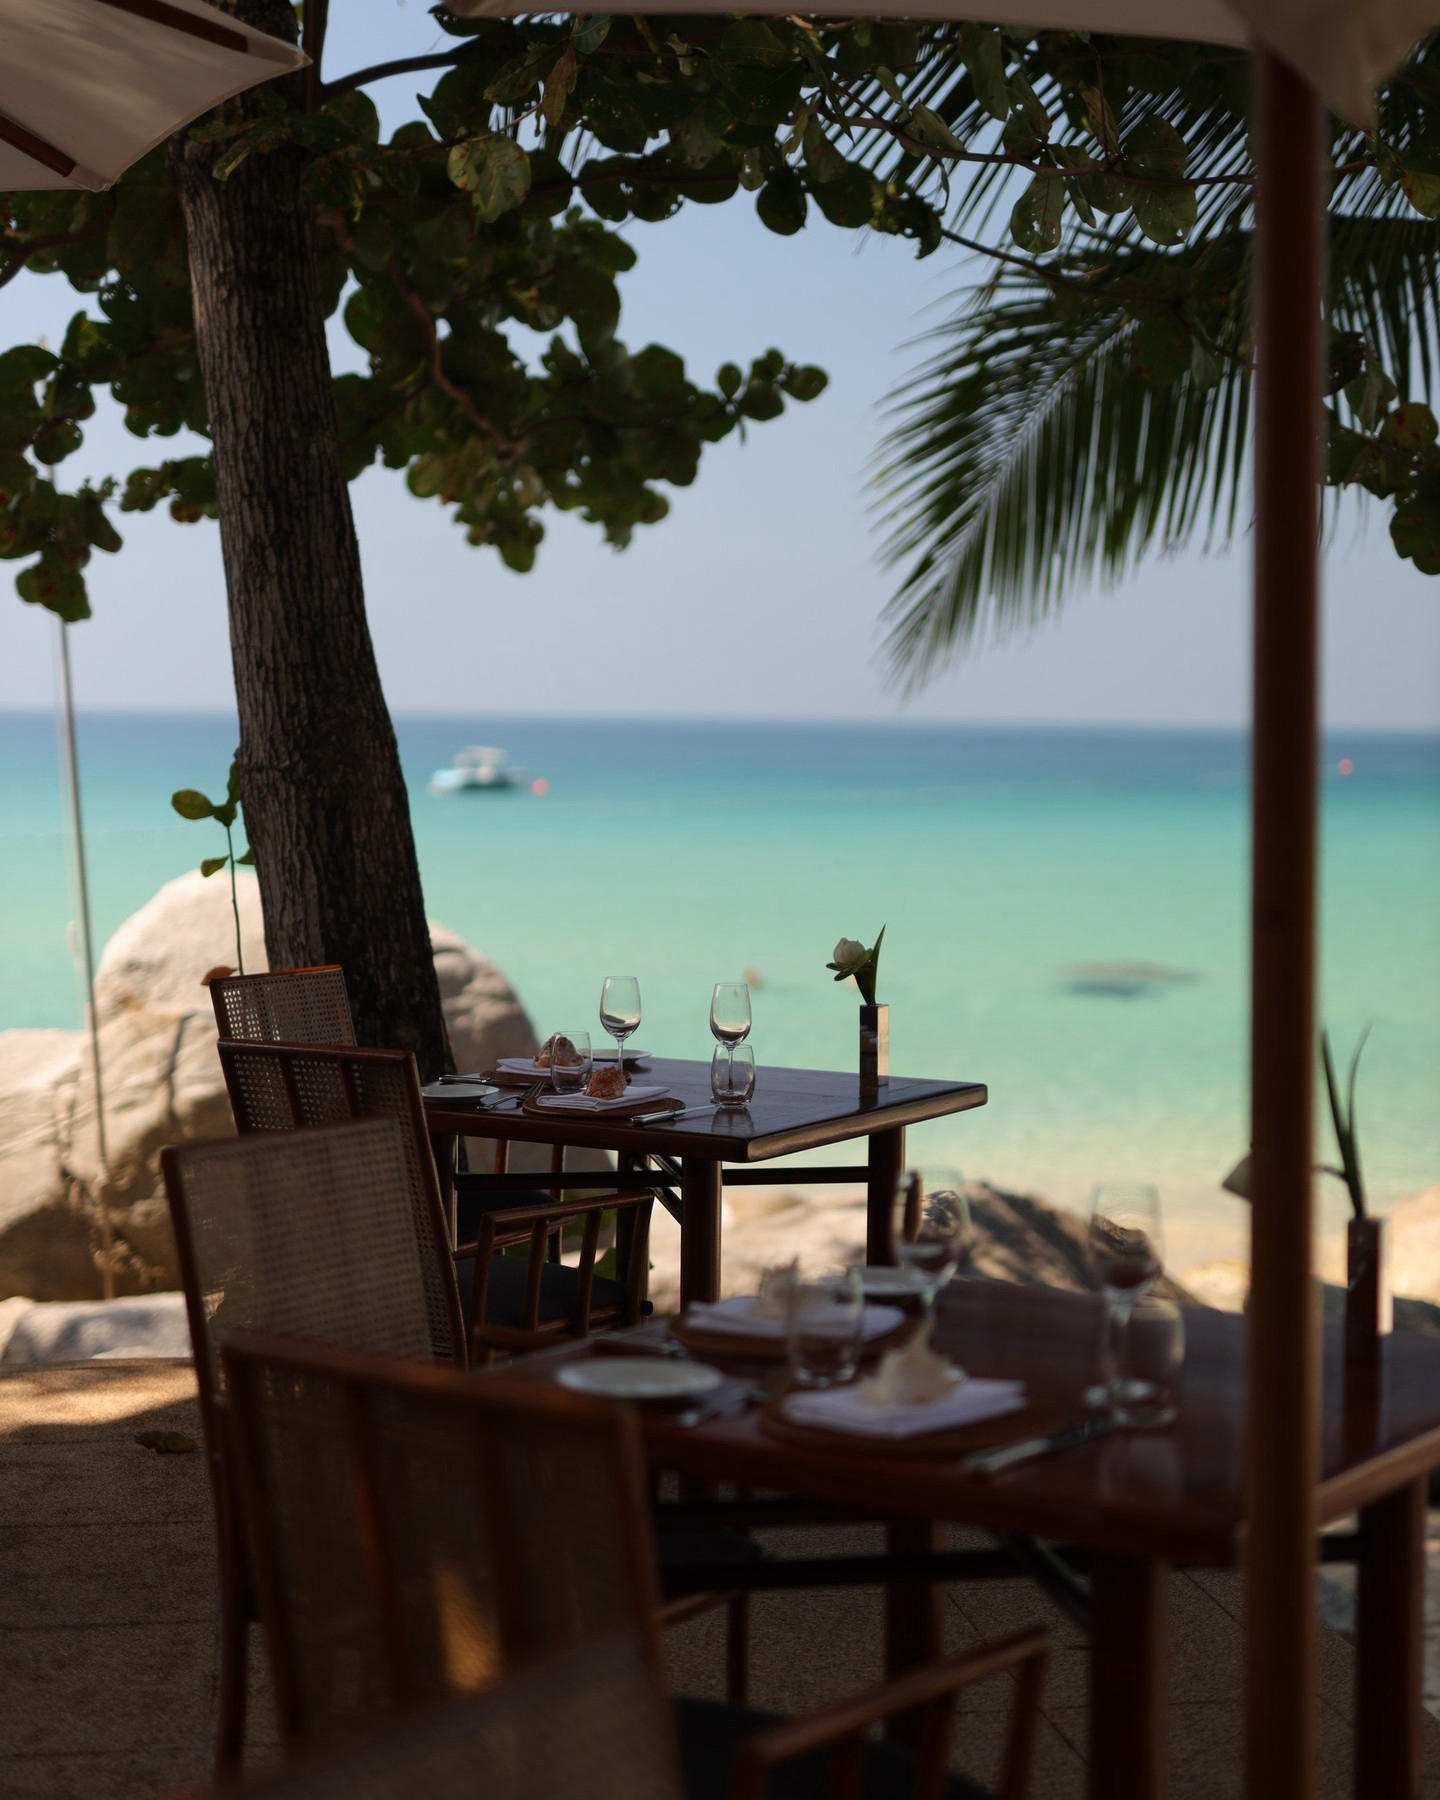 image  1 Open seasonally for drinks and dining, Amanpuri's Beach Terrace showcases an authentic selection of